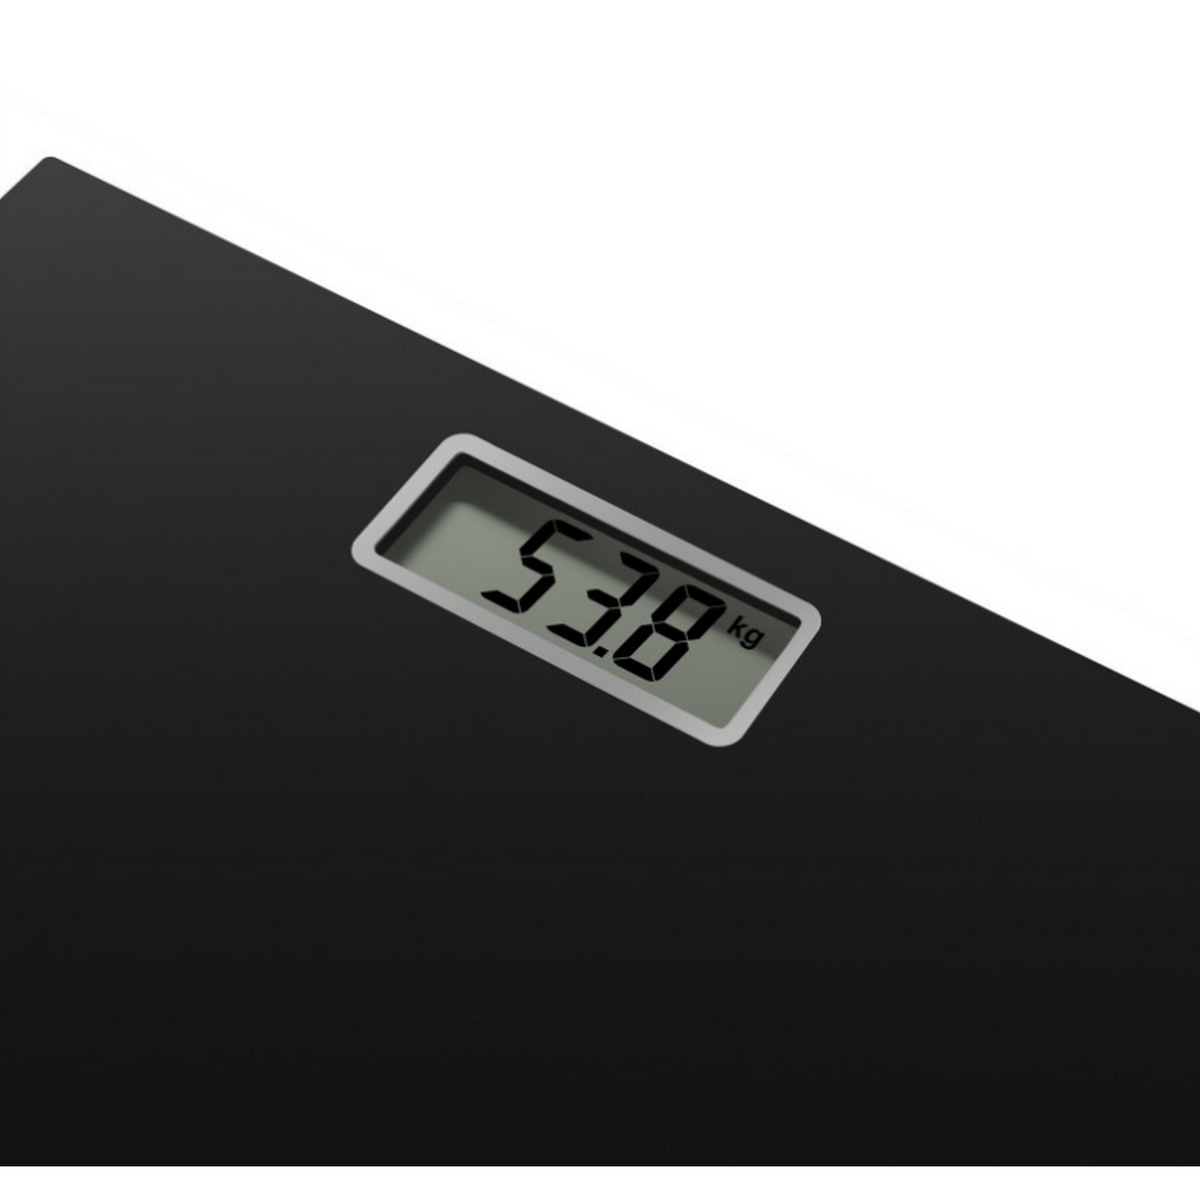 Personal BS1400 ROWENTA scale